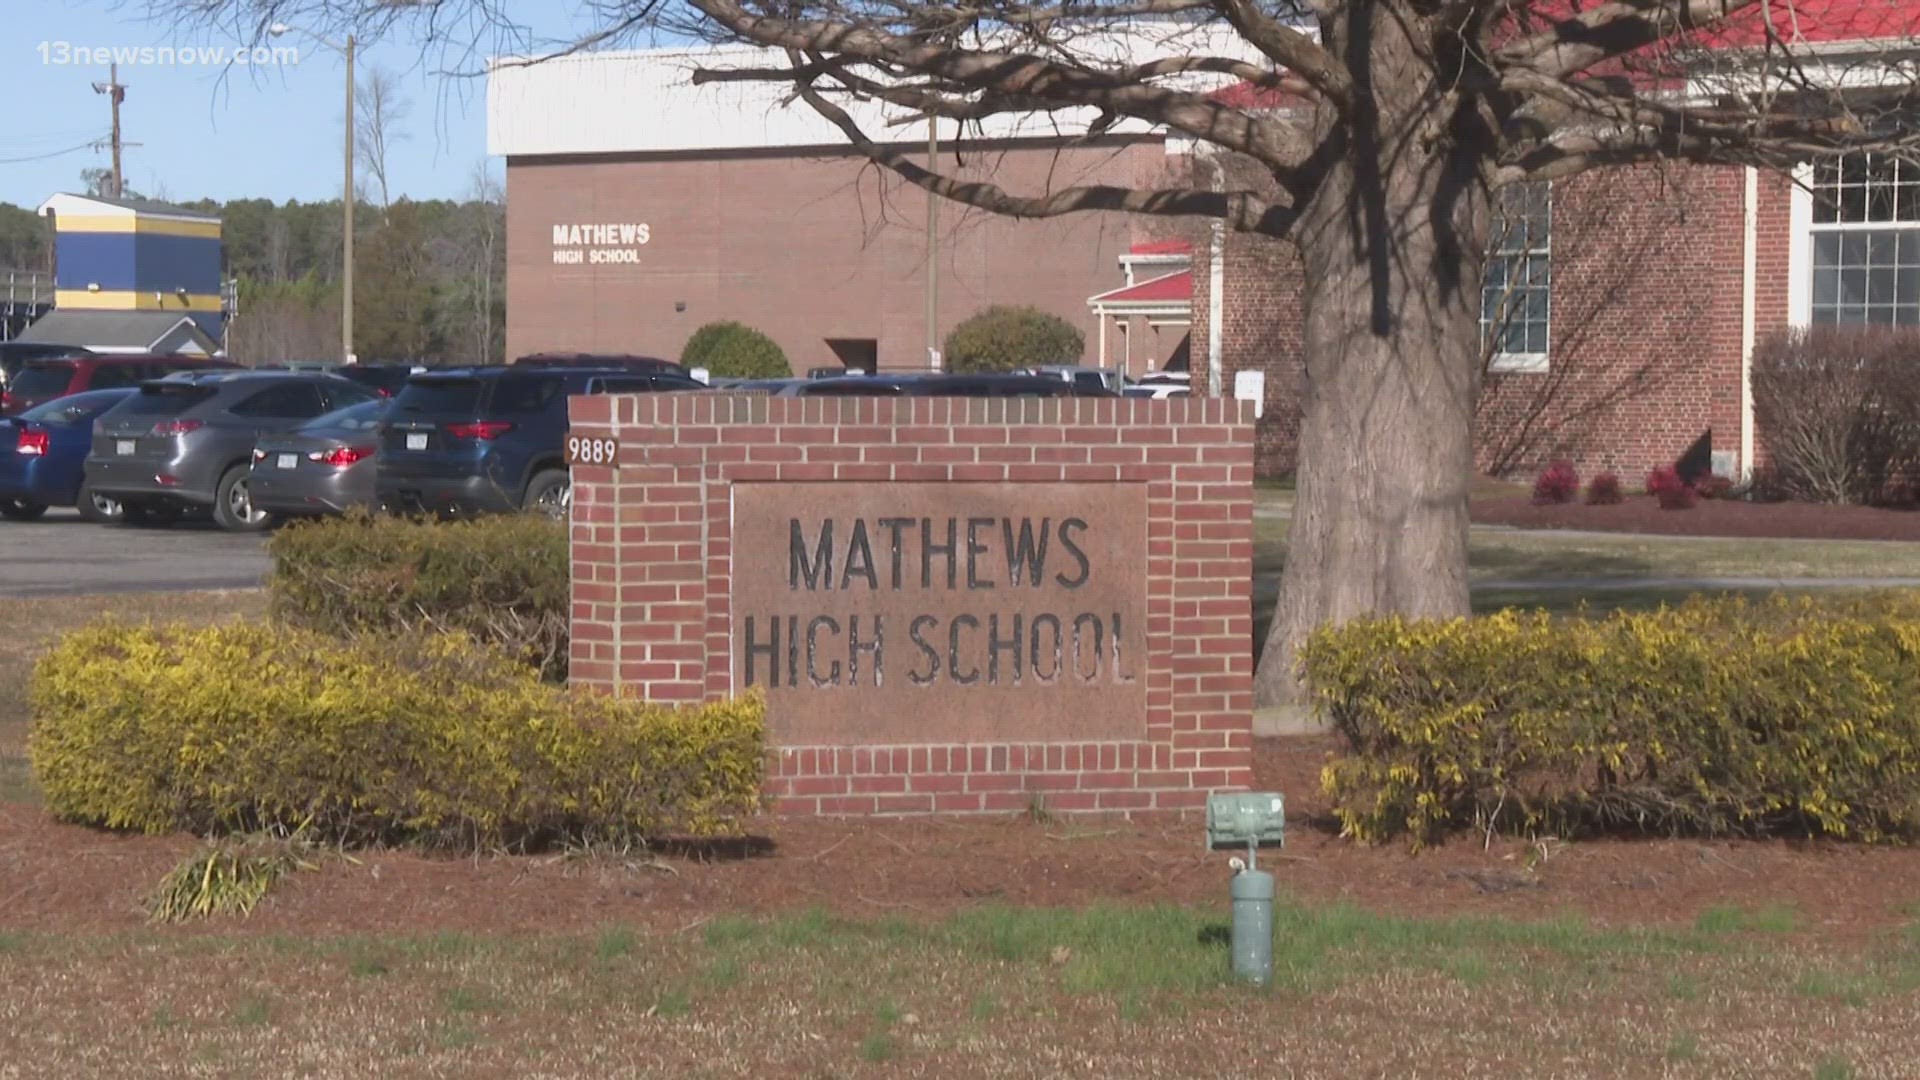 Community members and local NAACP respond to a racist threat at Mathews High School.